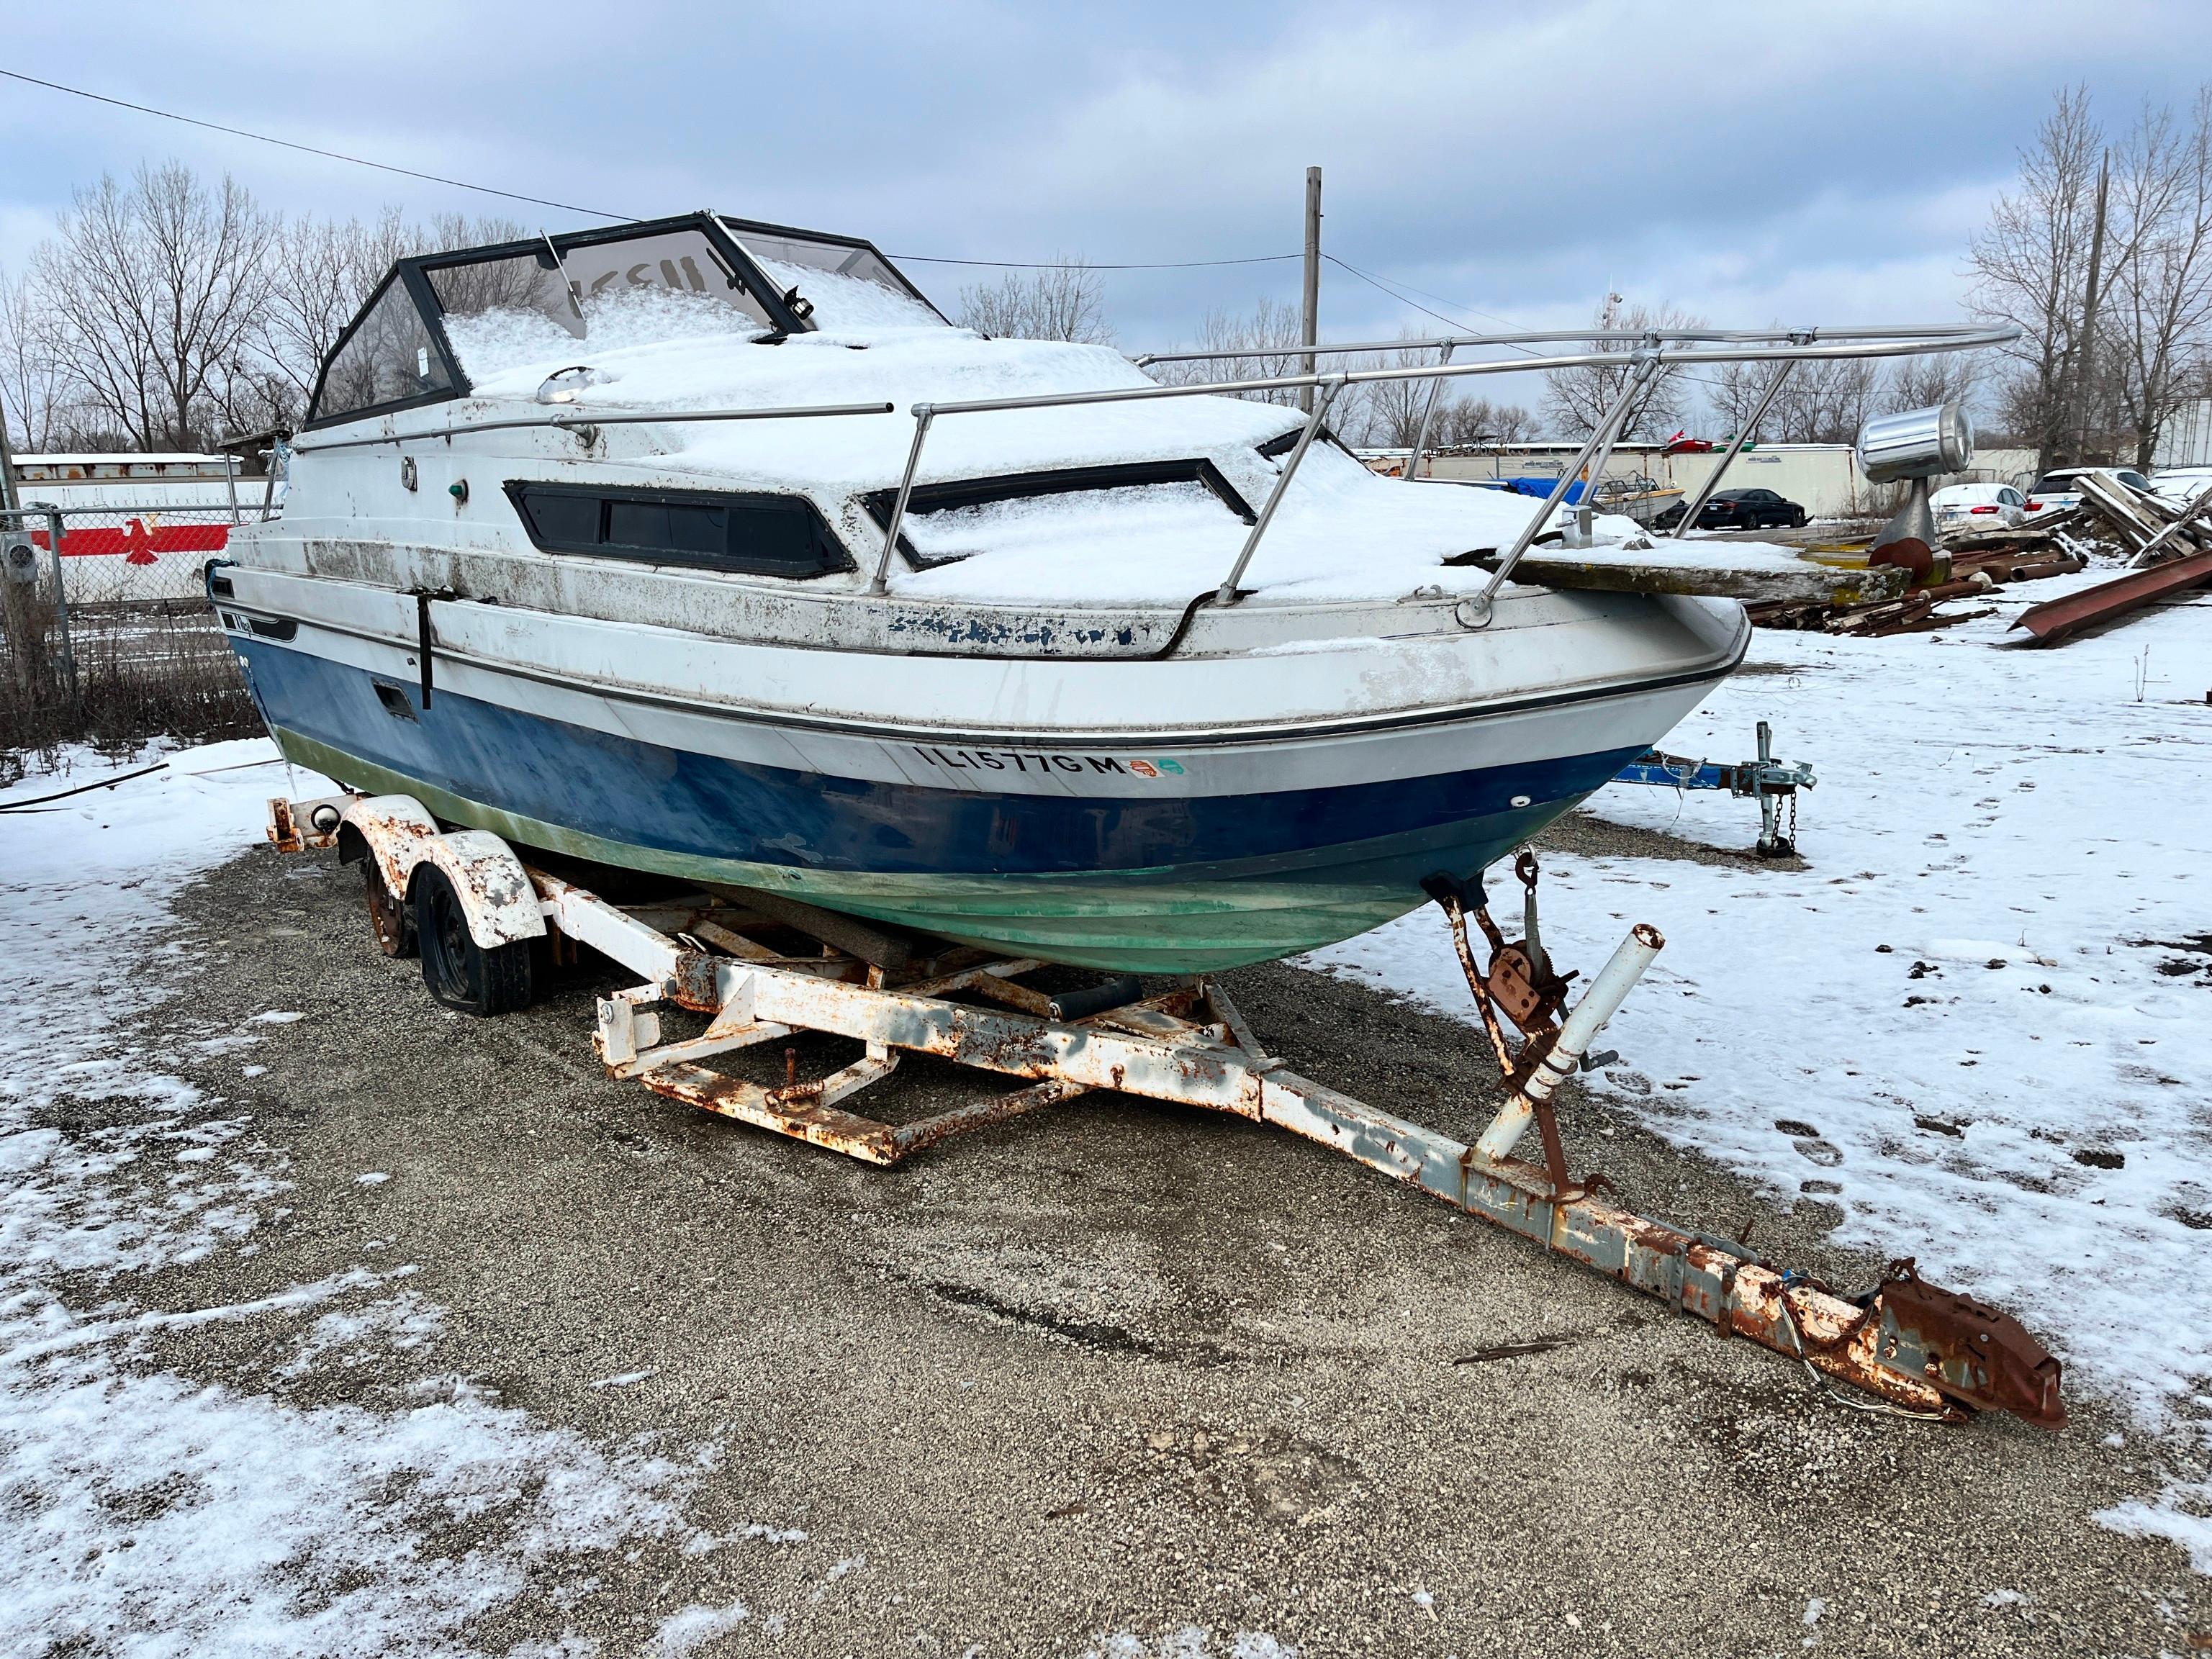 REGAL 24FT. BOAT VN:RGM07299M83J equipped with forward cabin, Mercruiser inboard/outboard engine -